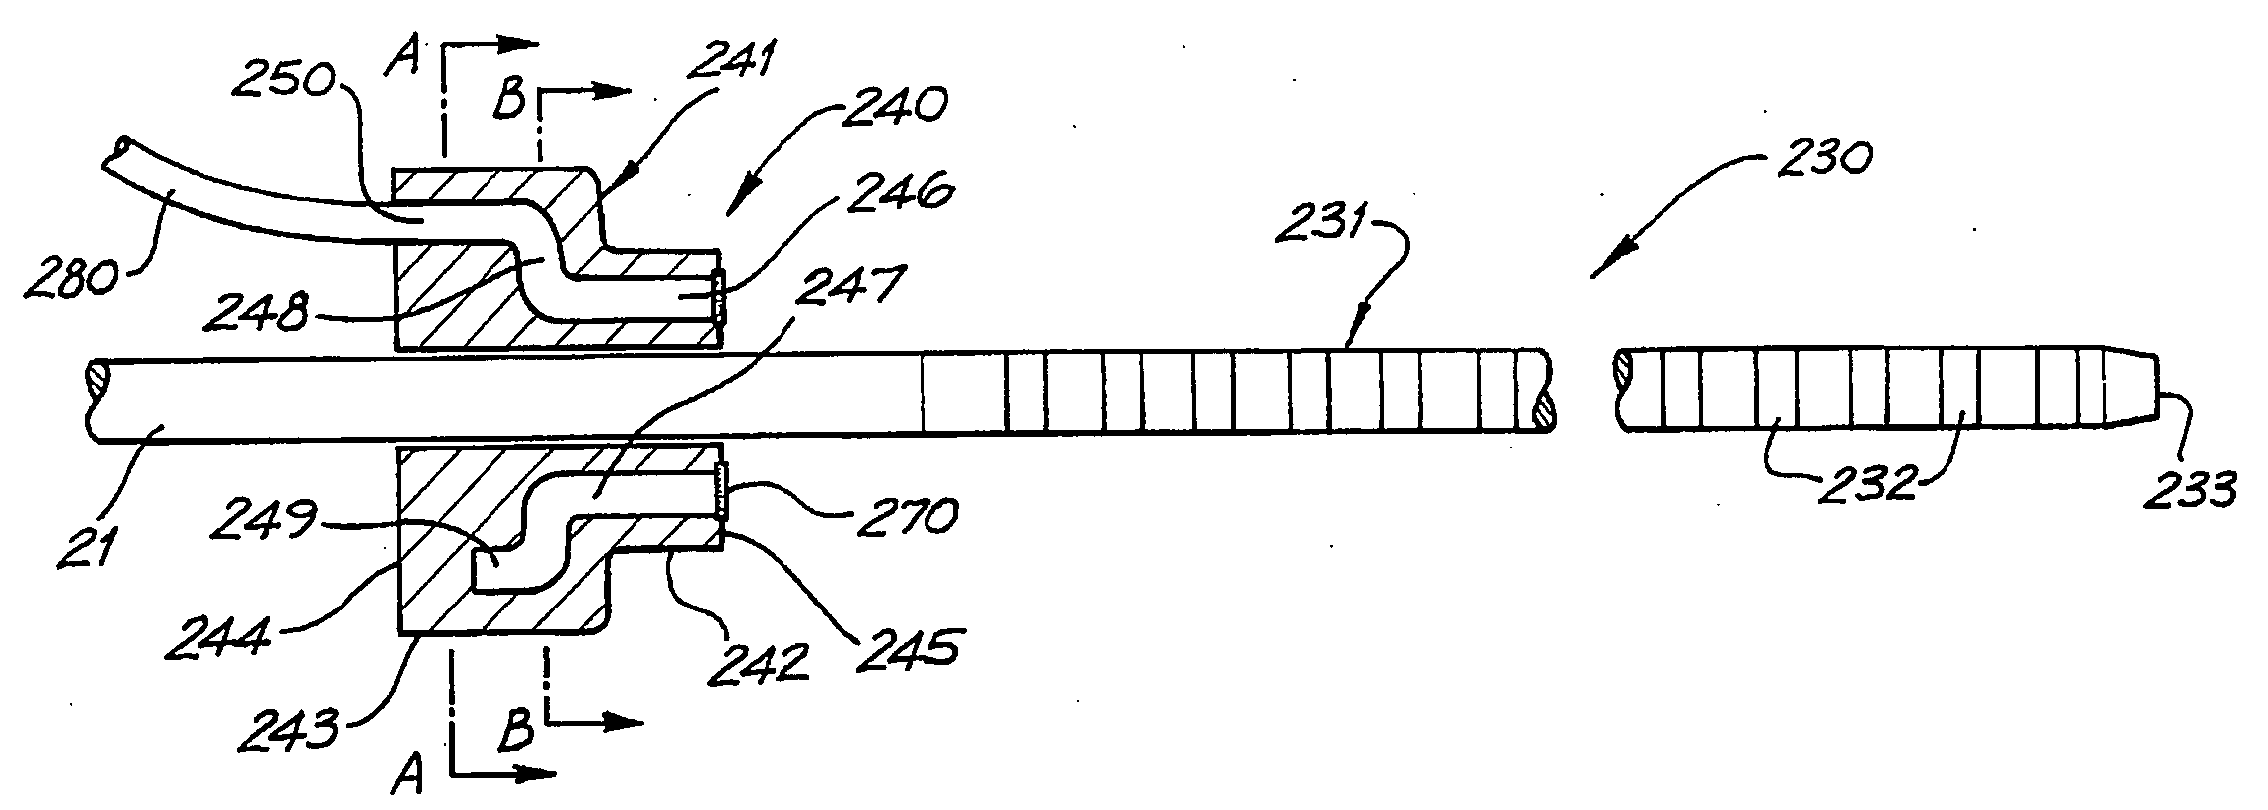 Cochlear implant drug delivery device